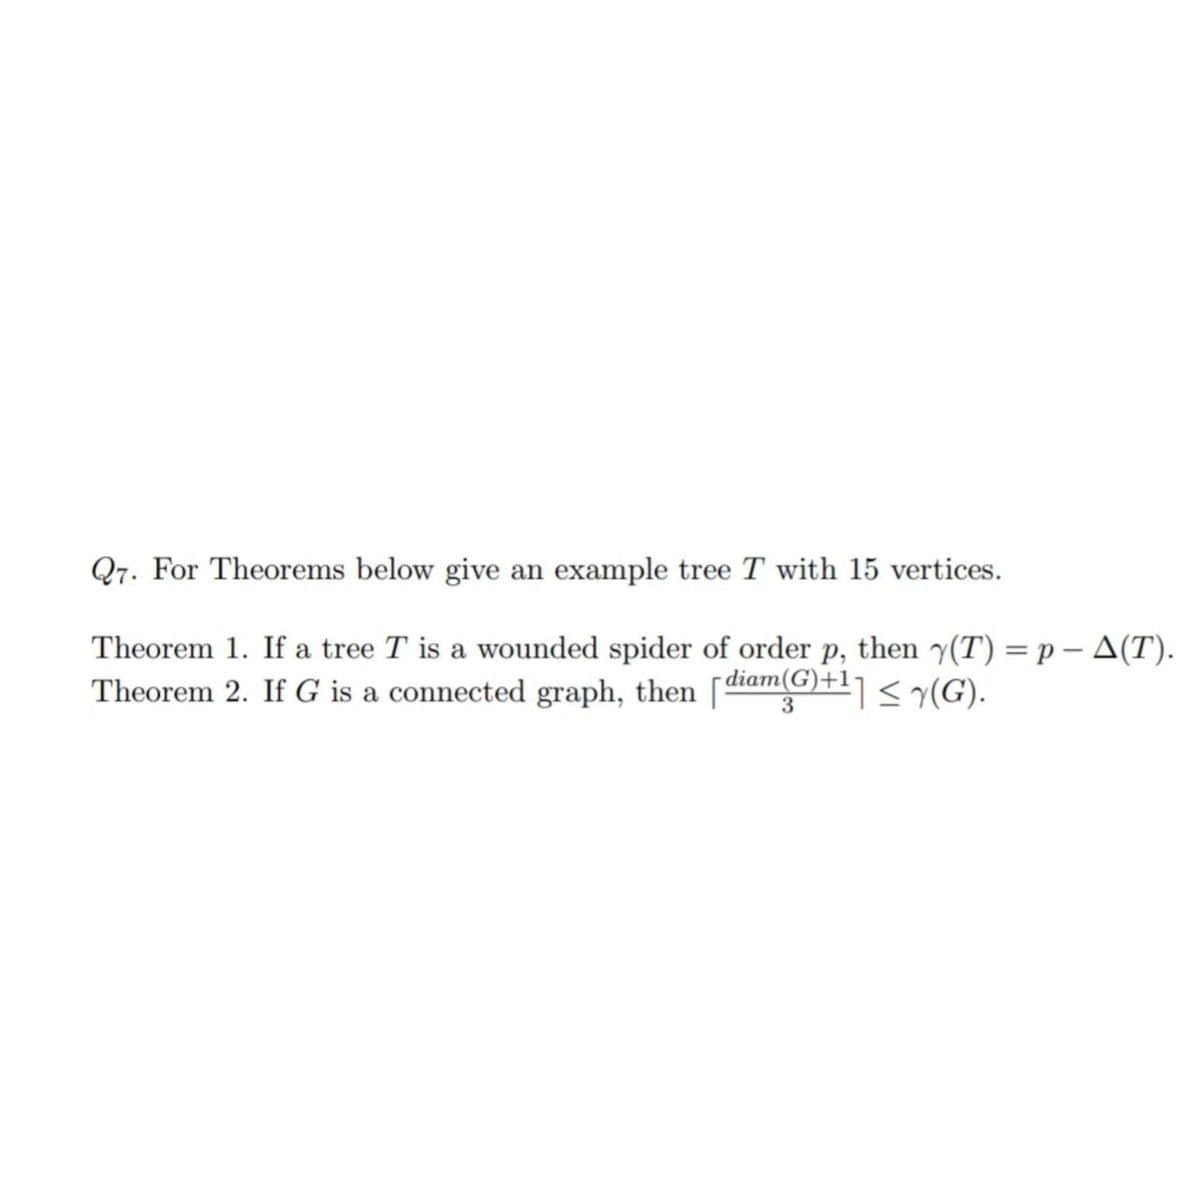 Q7. For Theorems below give an example tree T with 15 vertices.
Theorem 1. If a tree T is a wounded spider of order p, then y(T) = p - A(T).
Theorem 2. If G is a connected graph, then [diam(G)+¹] ≤ y(G).